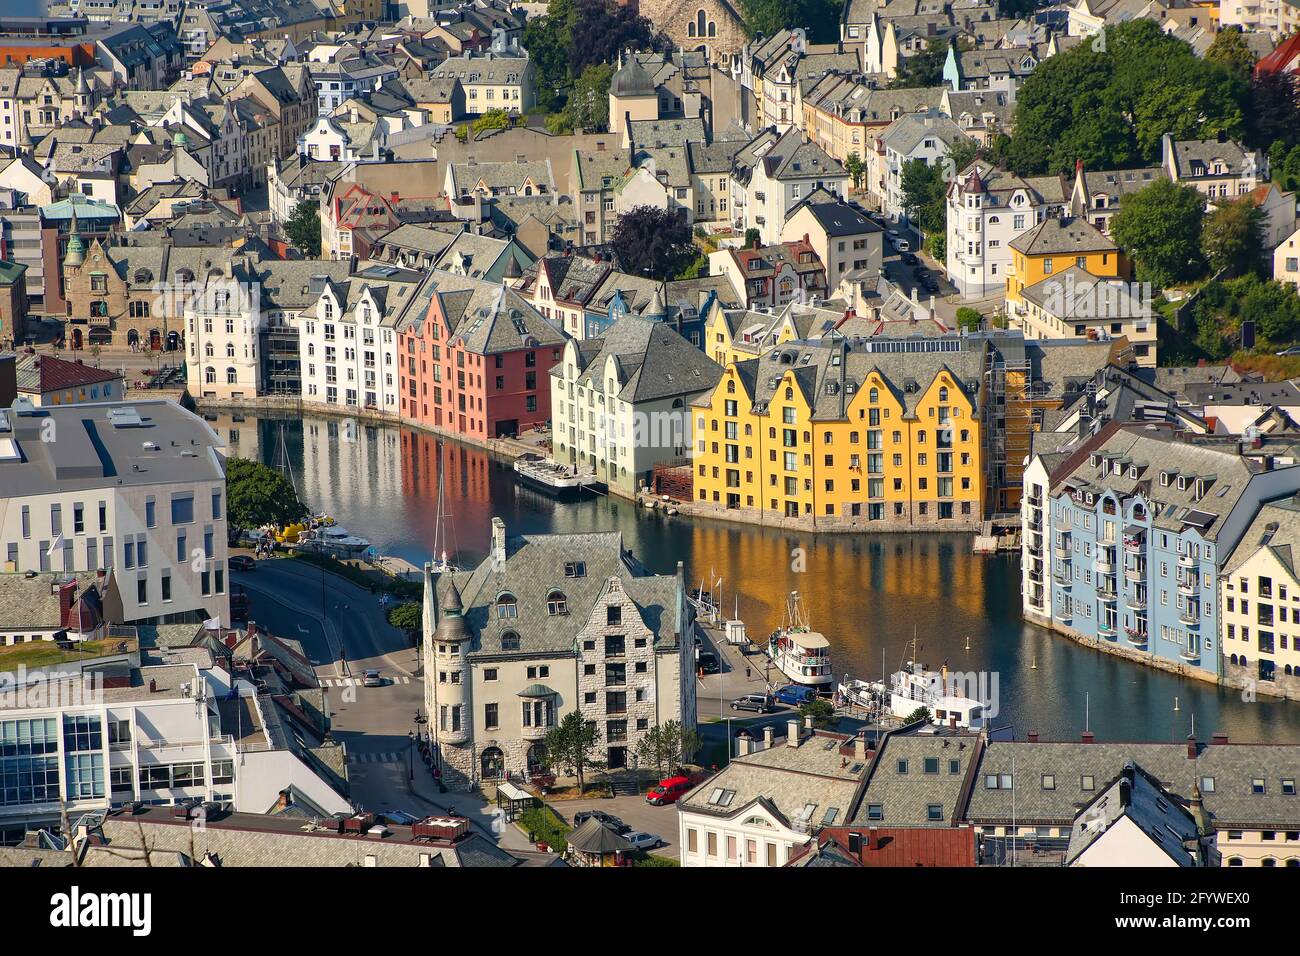 Close up of the beautiful buildings in the town centre from above. Art nouveau architecture and canals from the viewpoint Aksla, Alesund, Norway. Stock Photo